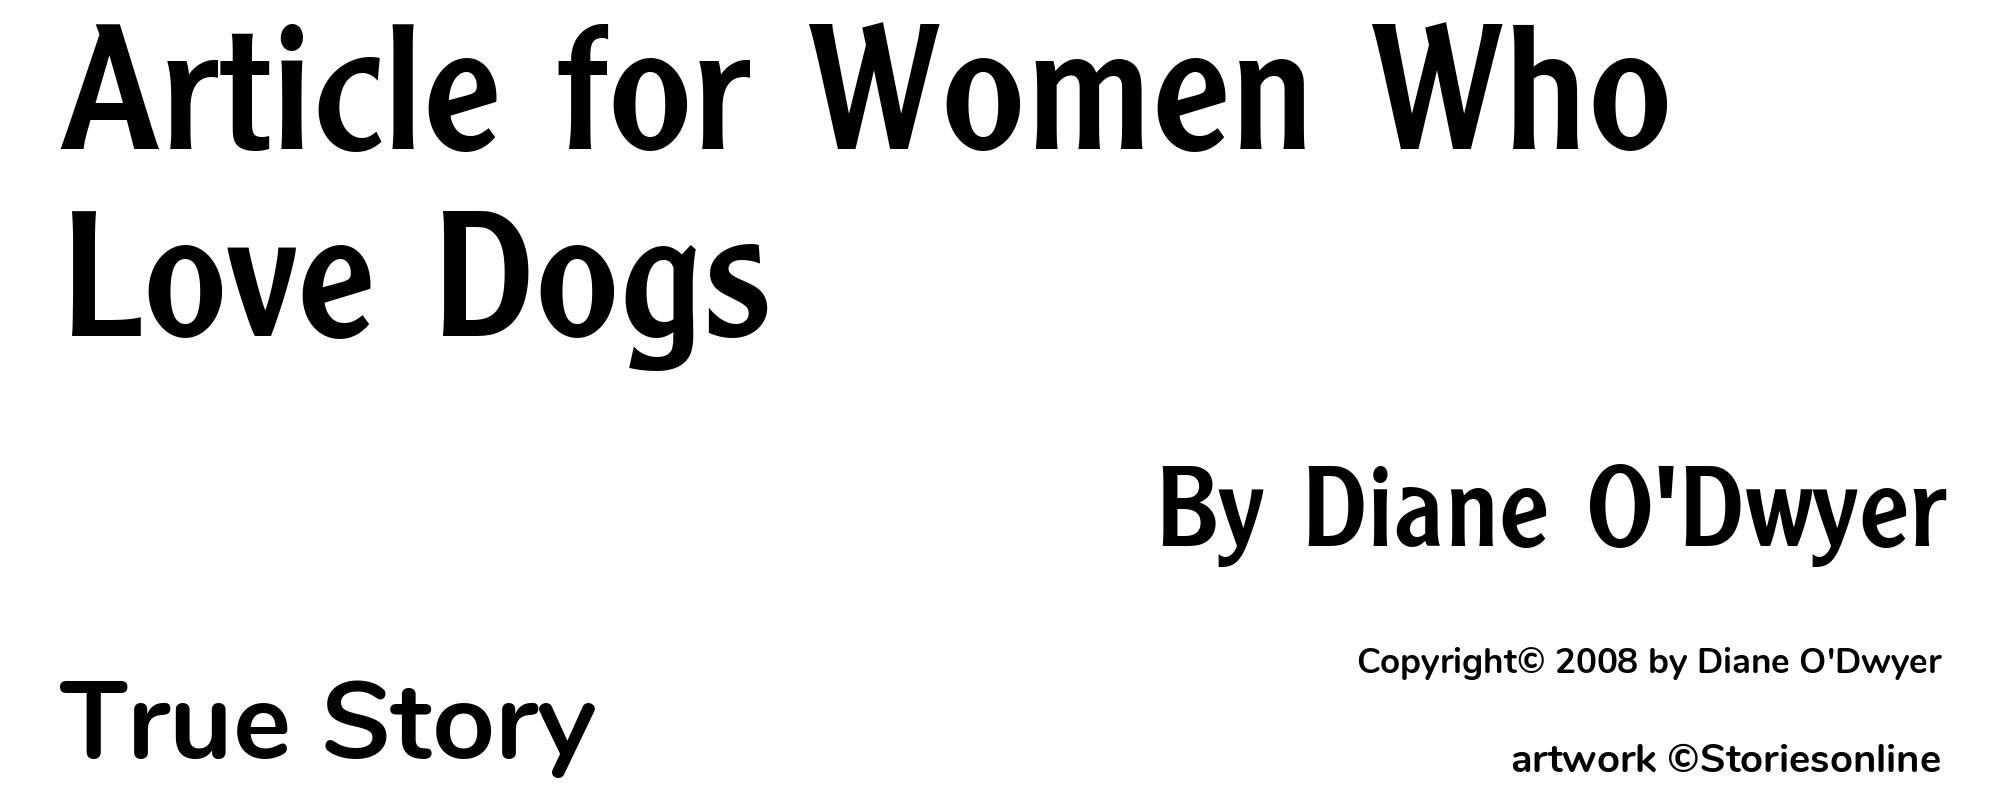 Article for Women Who Love Dogs - Cover